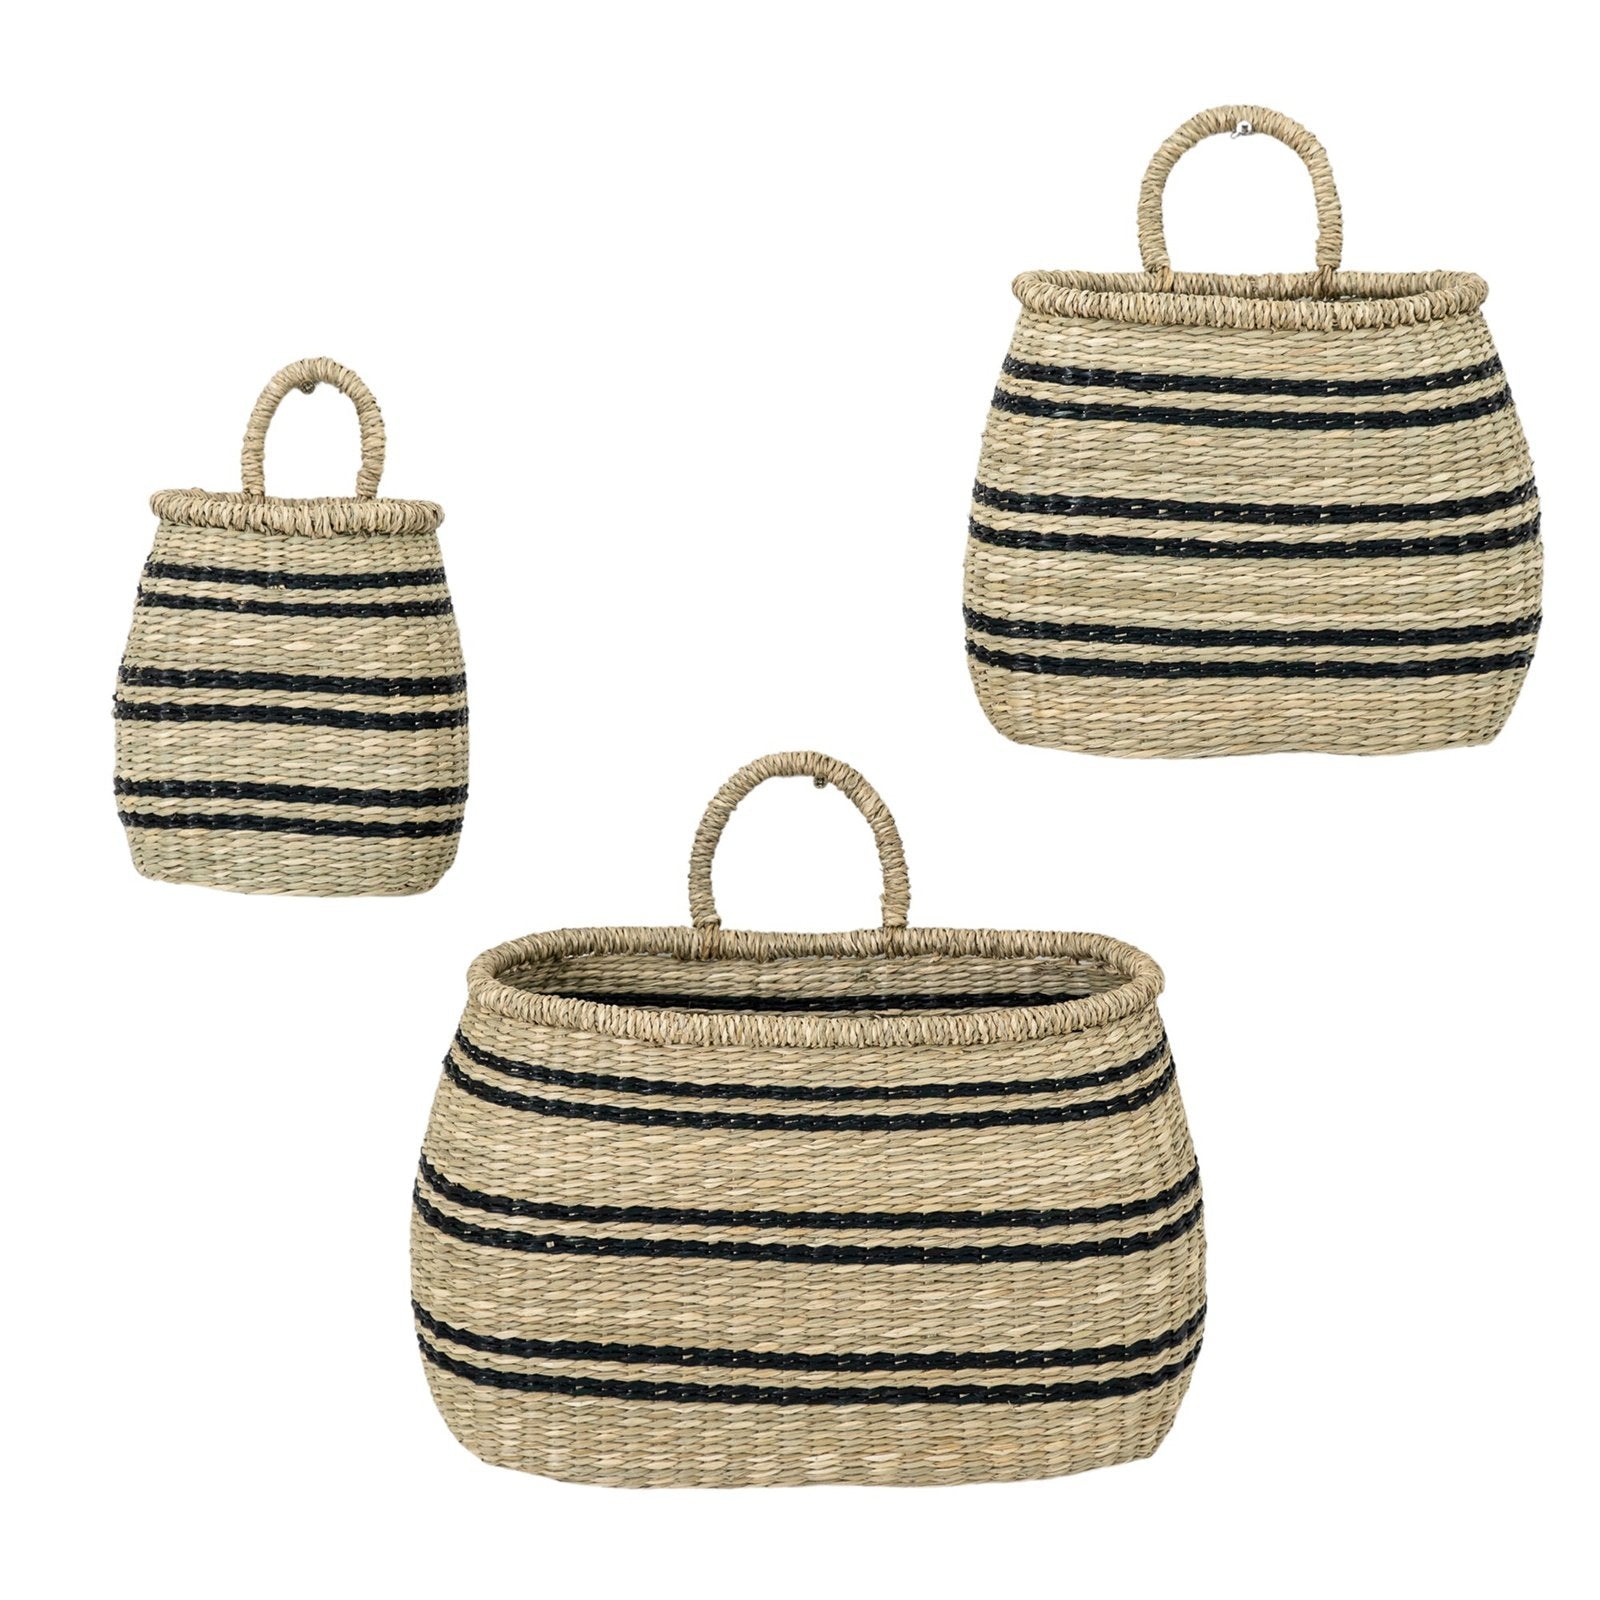 Gassio Seagrass Wall Baskets Set of 3 - Individually Sized